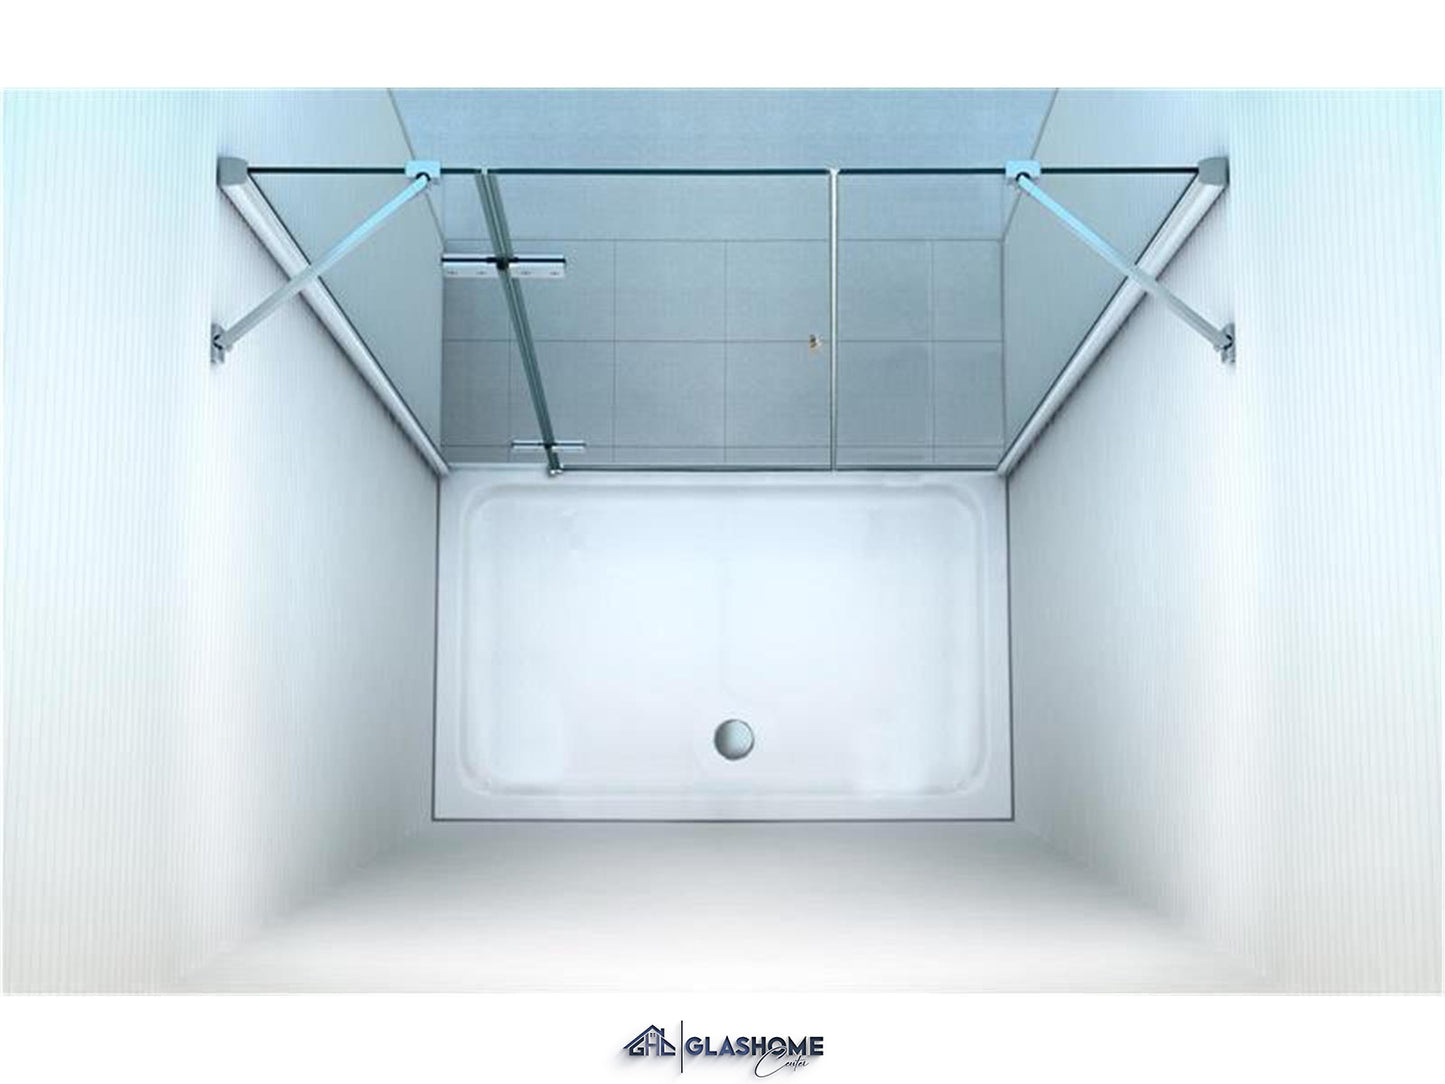 GlasHomeCenter - niche cabin New York (195 x 195 cm) - 8mm toughened safety glass - without shower tray